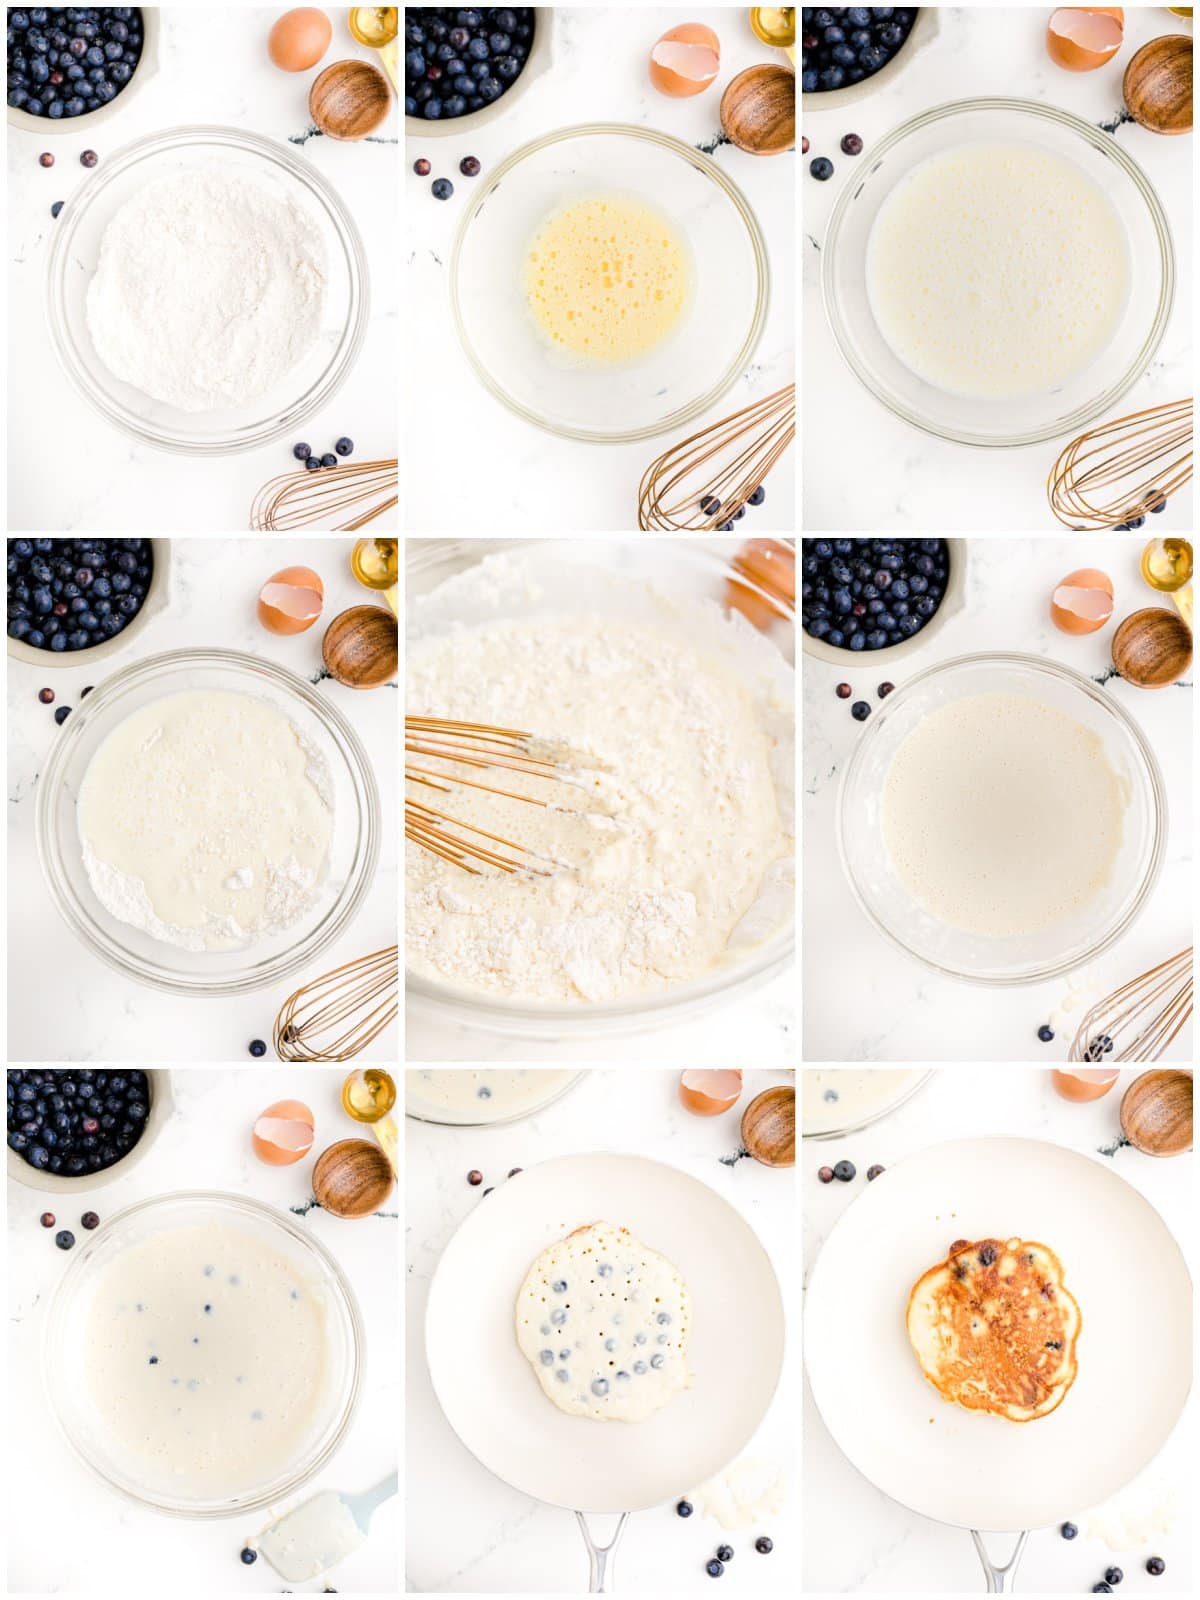 Step by step photos on how to make Fluffy Blueberry Pancakes.